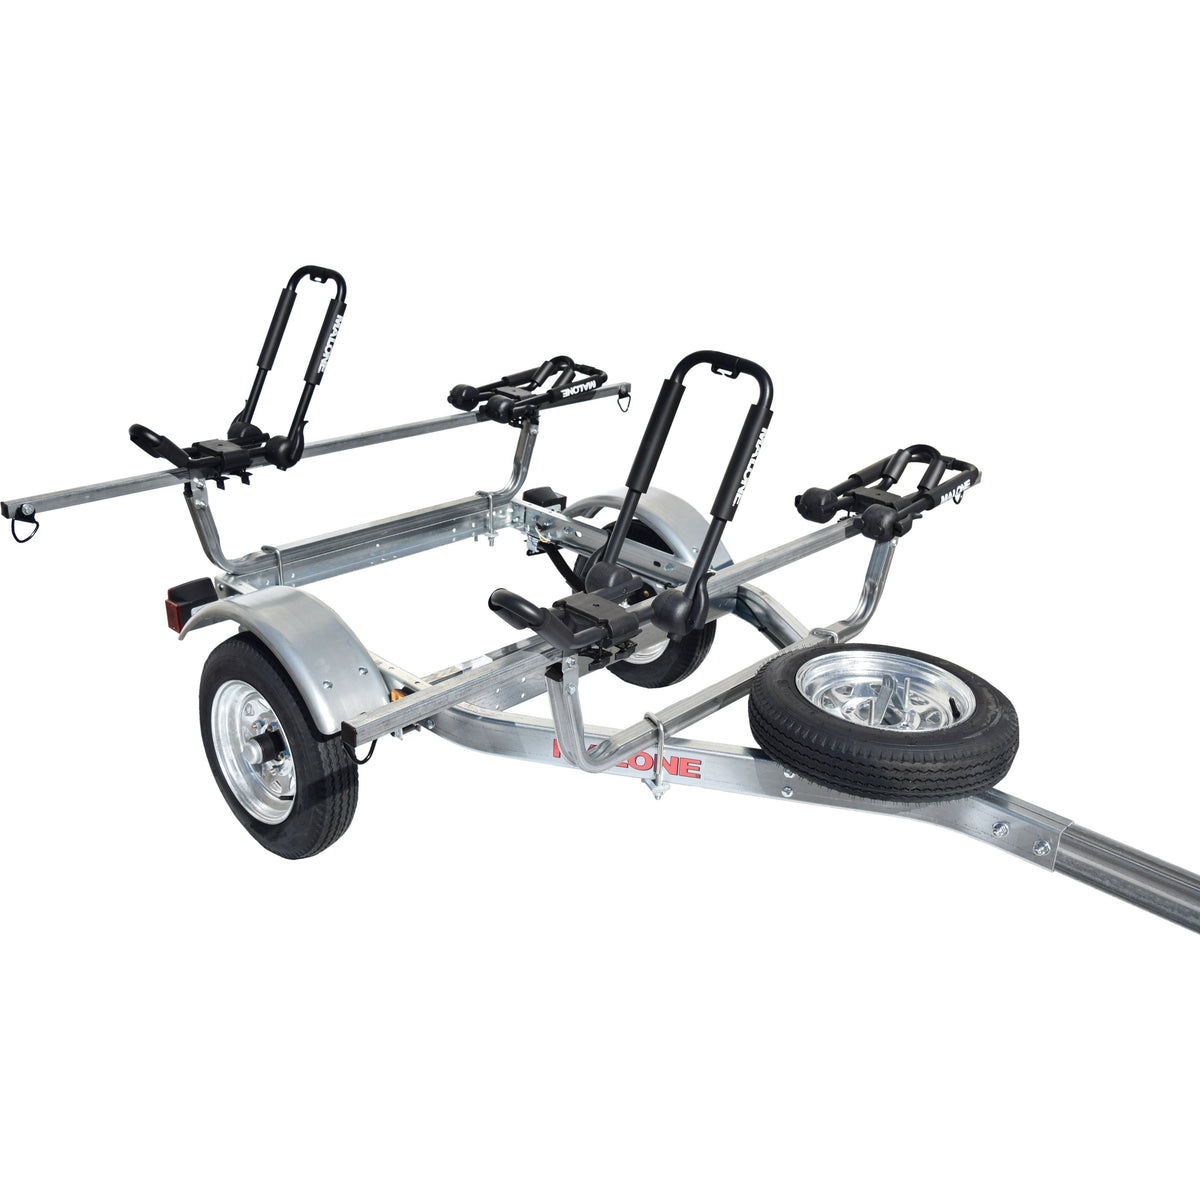 Malone MicroSport Package 1-Trailer, 1-Spare Tire Kit, 2 - J-Pro2